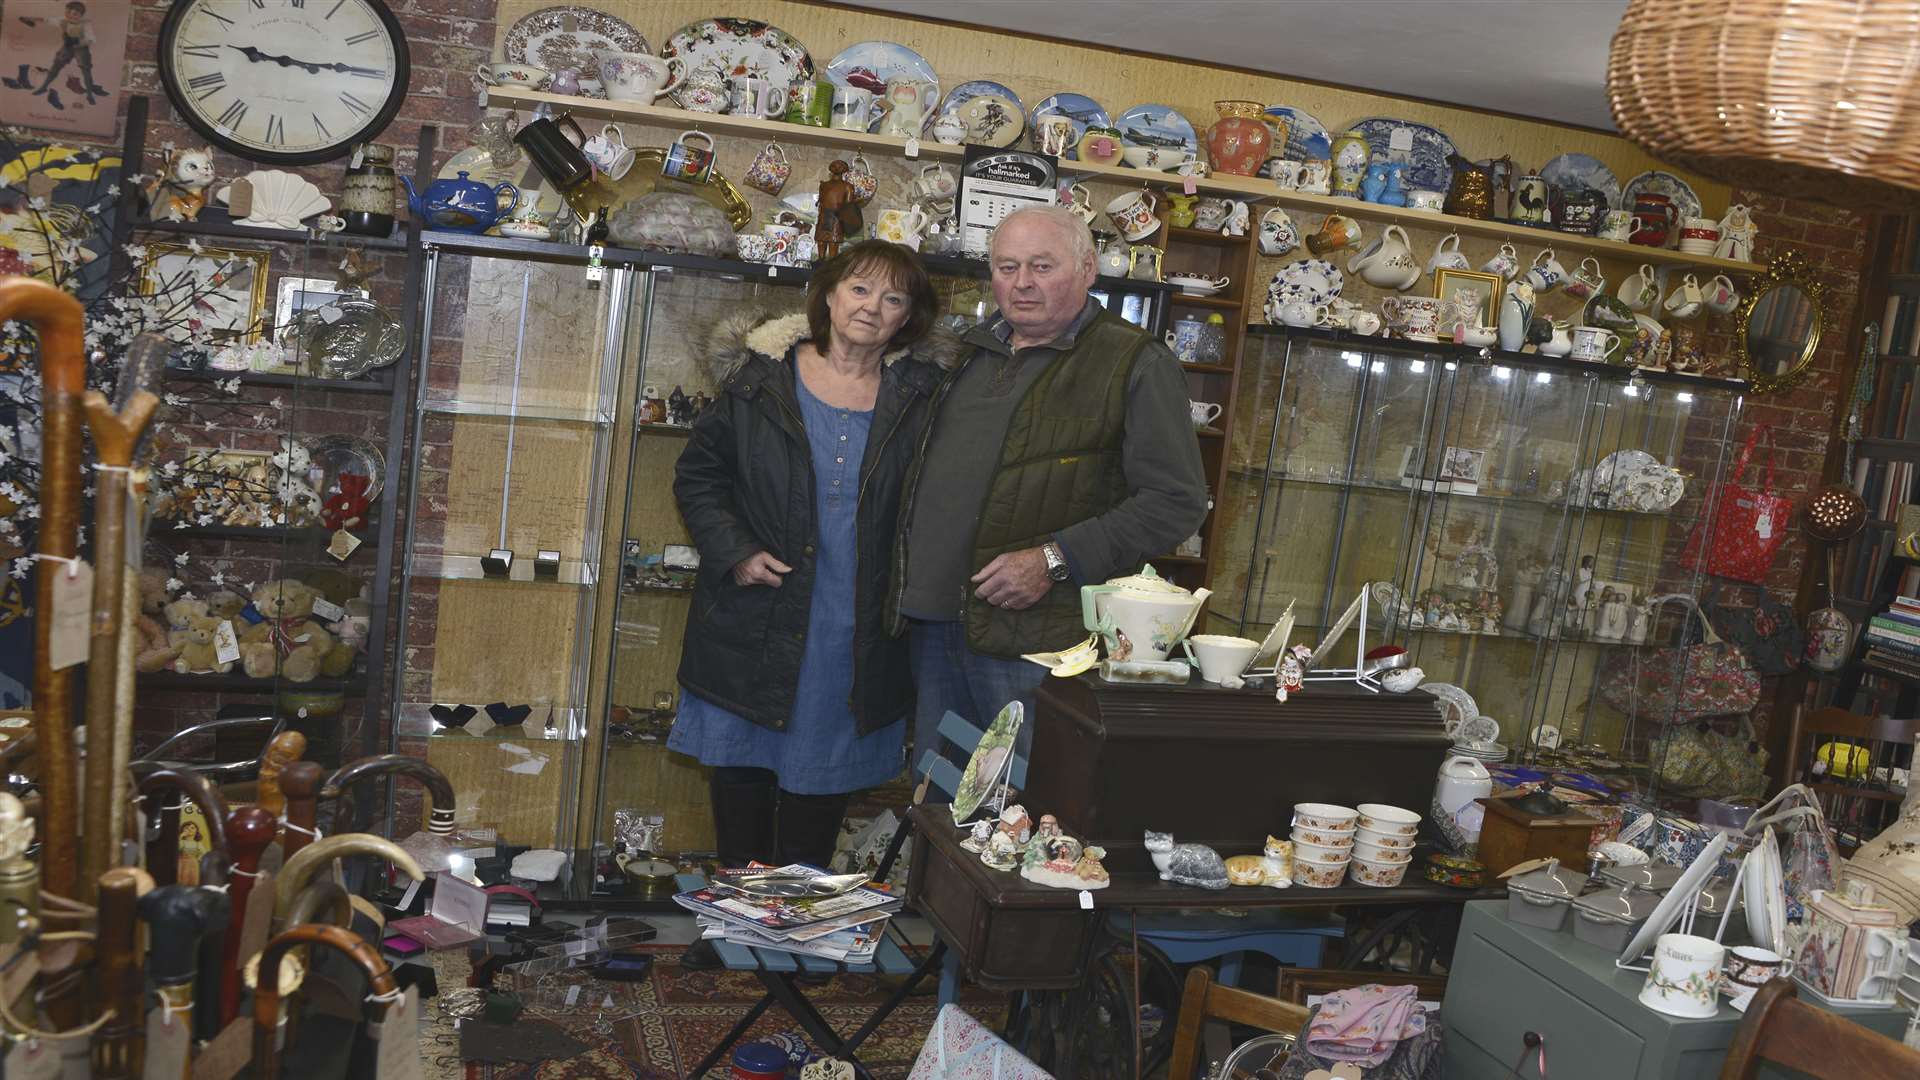 Wendy Pursglove and Chris Pursglove in front of the cabinets that were emptied